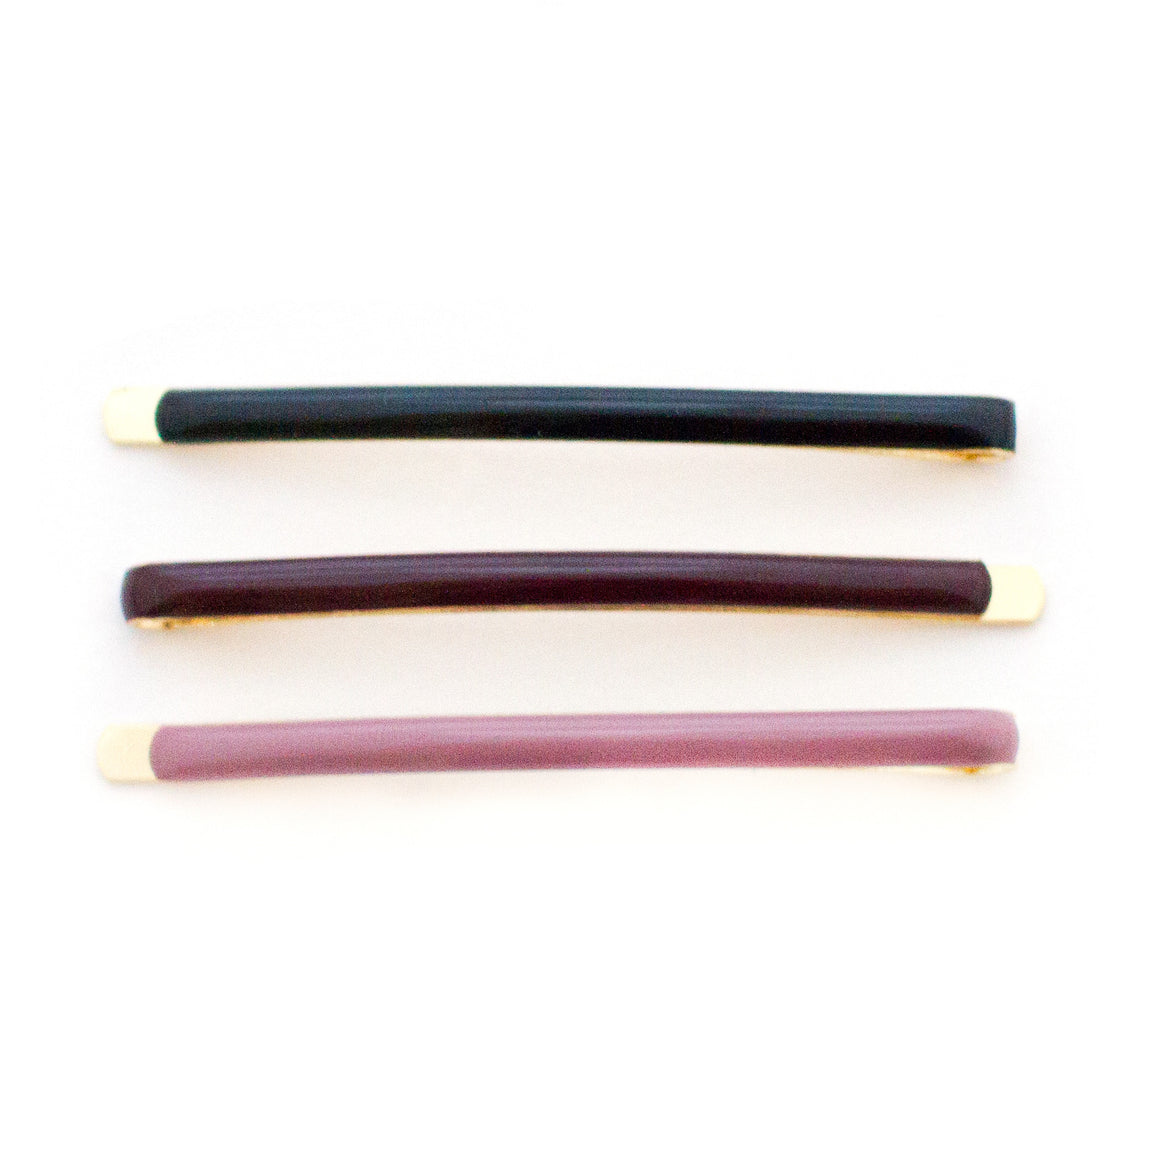 black burgundy and mauve bobby pins for classic styles and neutral hair acessories